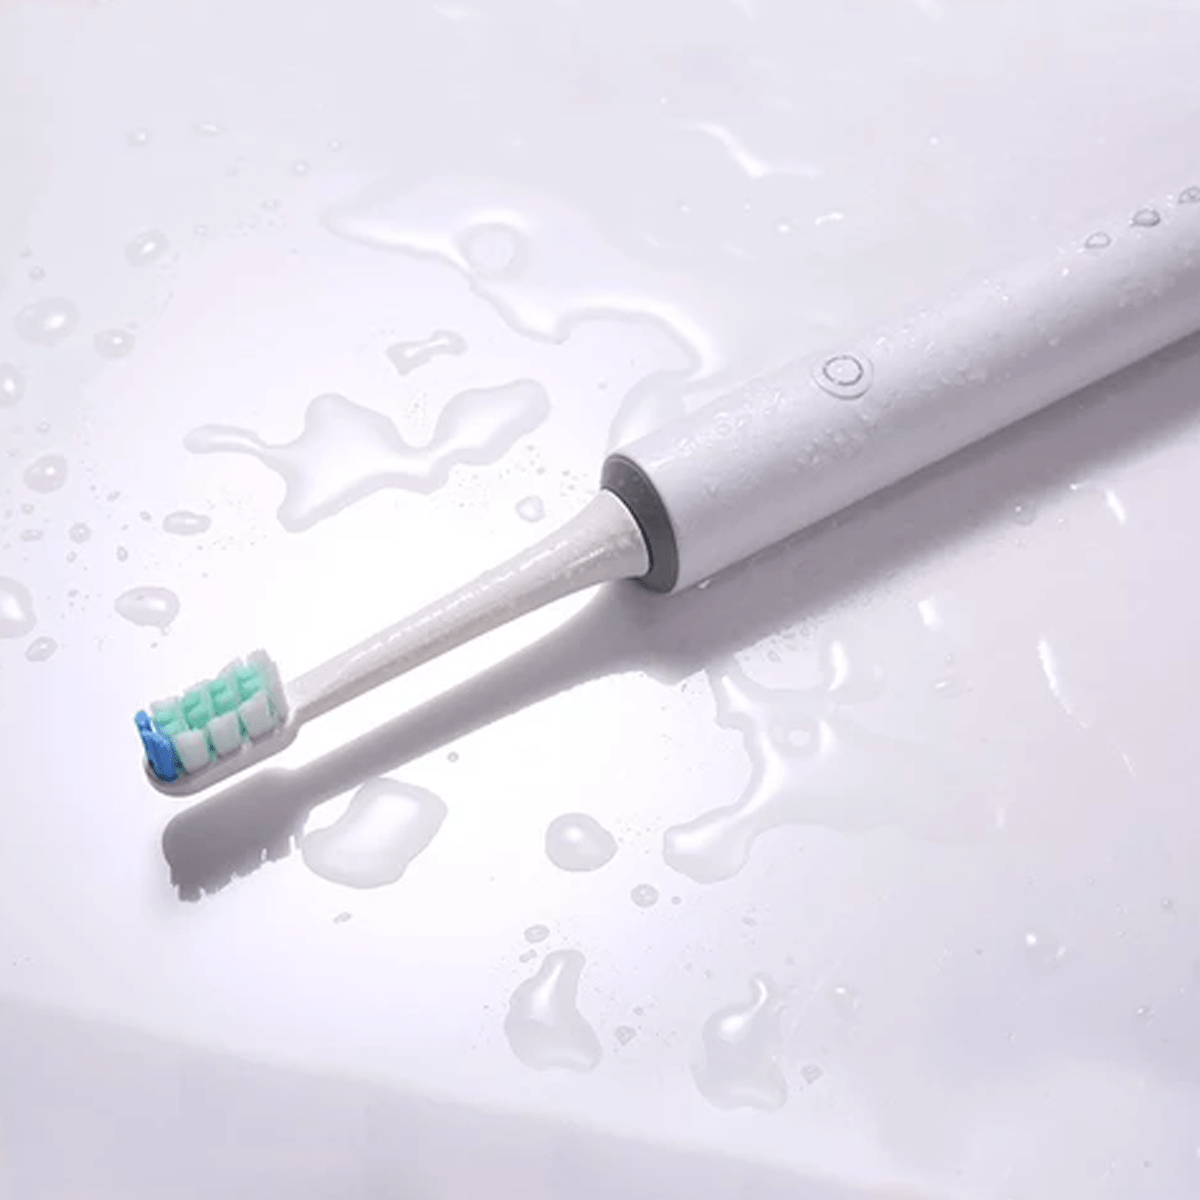 T-01 Sonic Electric Toothbrush